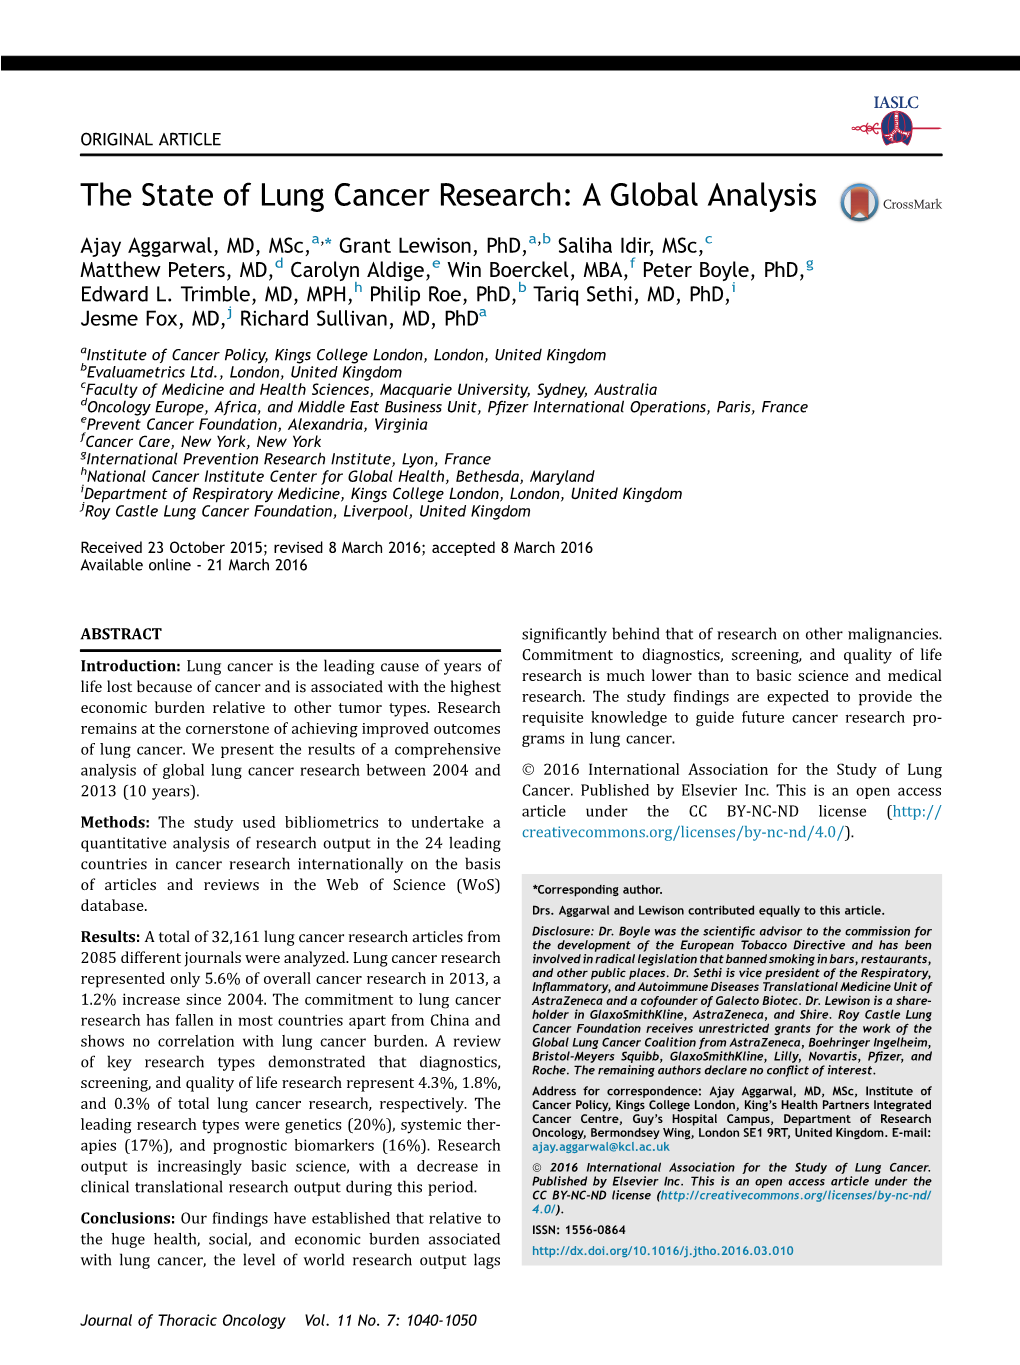 The State of Lung Cancer Research: a Global Analysis